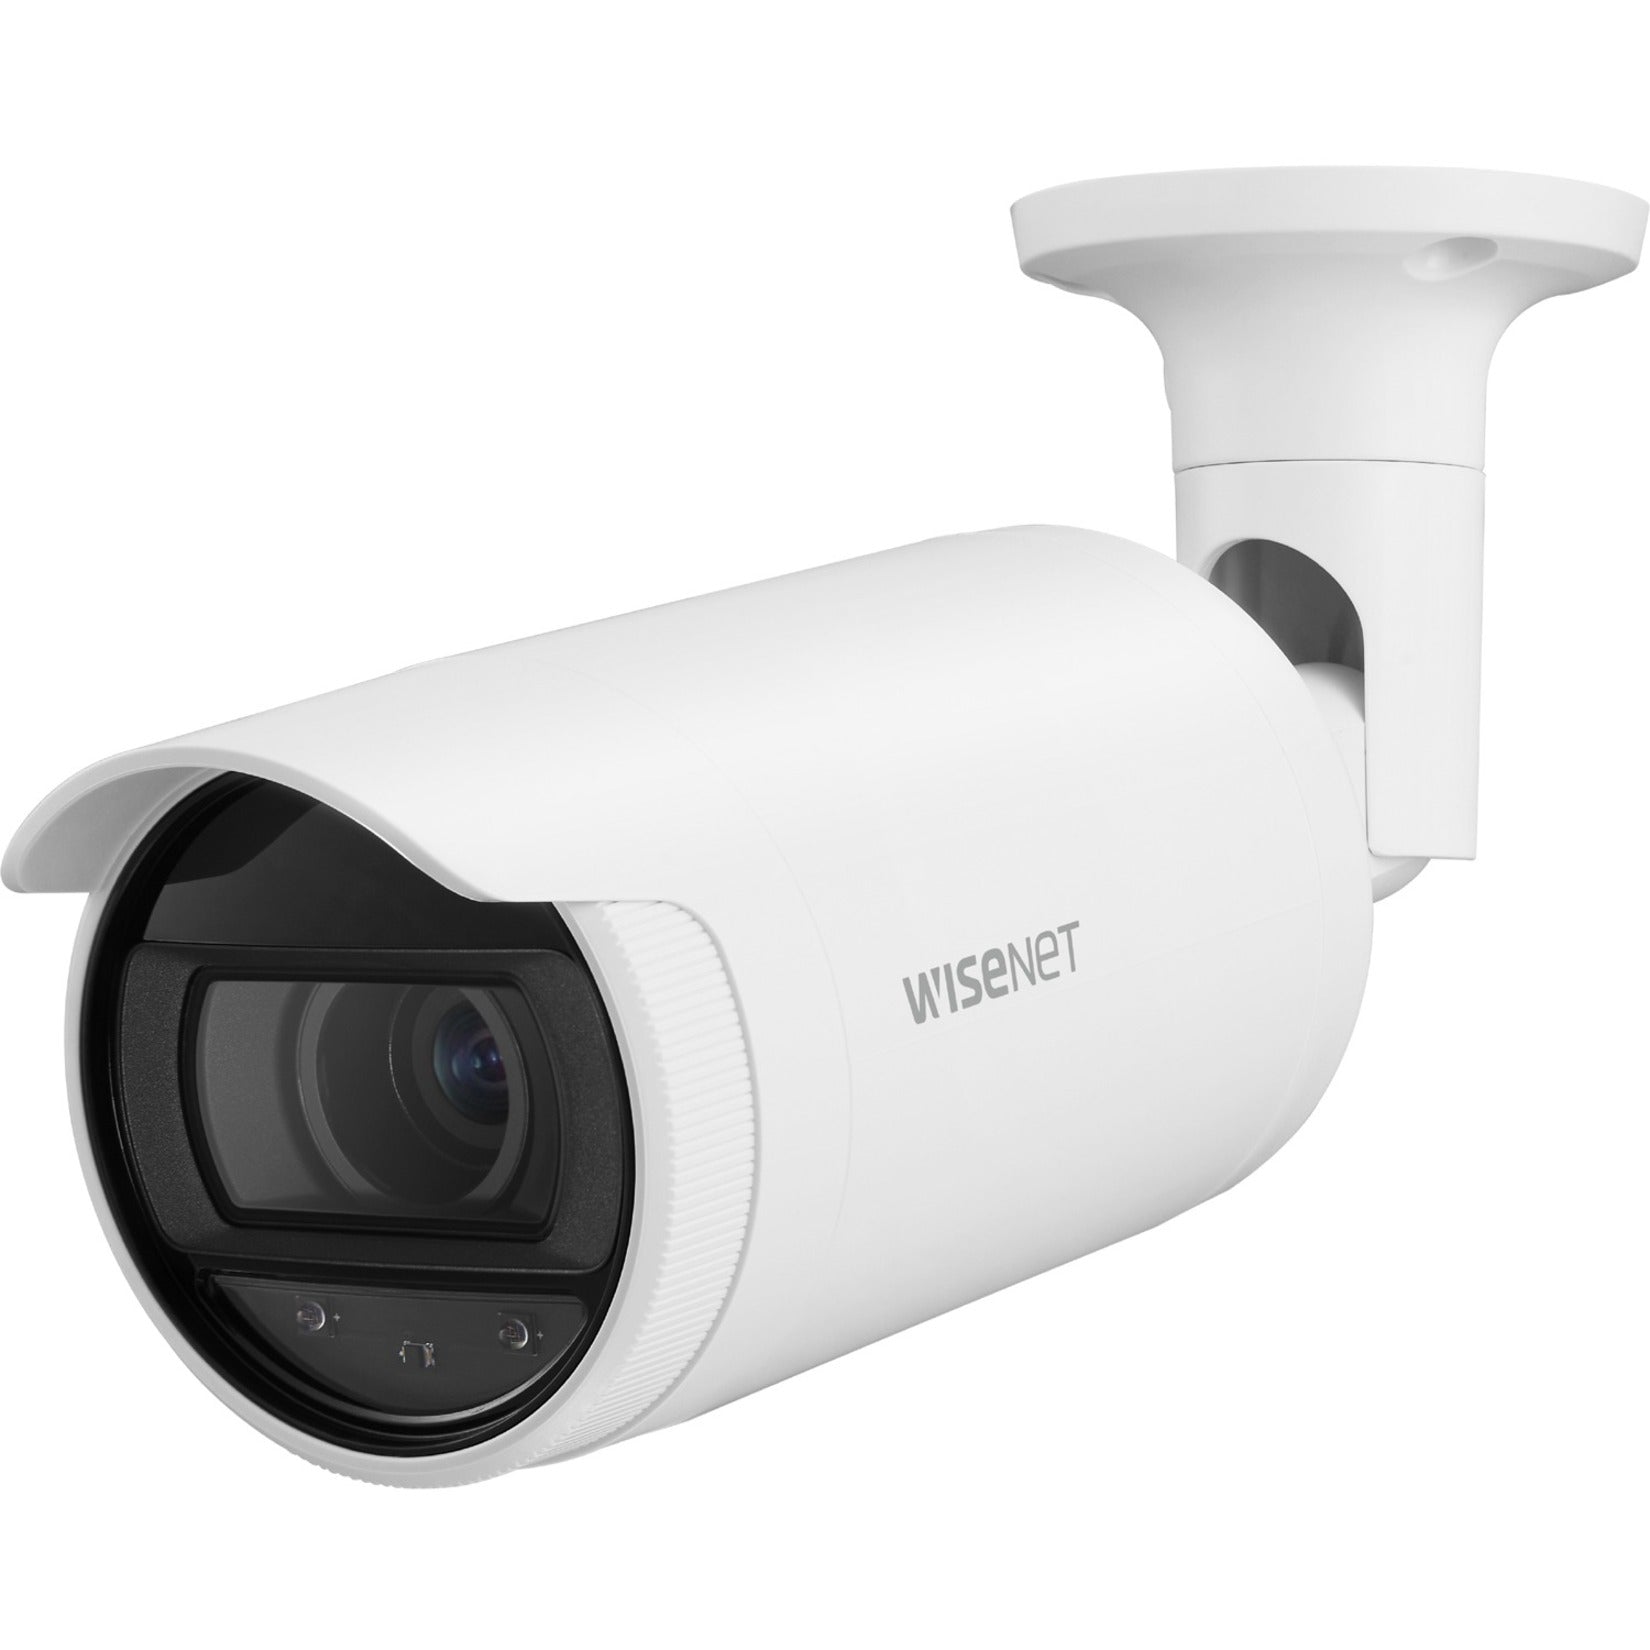 Wisenet ANO-L7082R 4MP IR Bullet Network Camera, Color, Varifocal Lens, 3.1x Optical Zoom, H.265/H.264 Video Formats, 2560 x 1440 Resolution, Memory Card Storage, Motion Detection, IP66 Rated